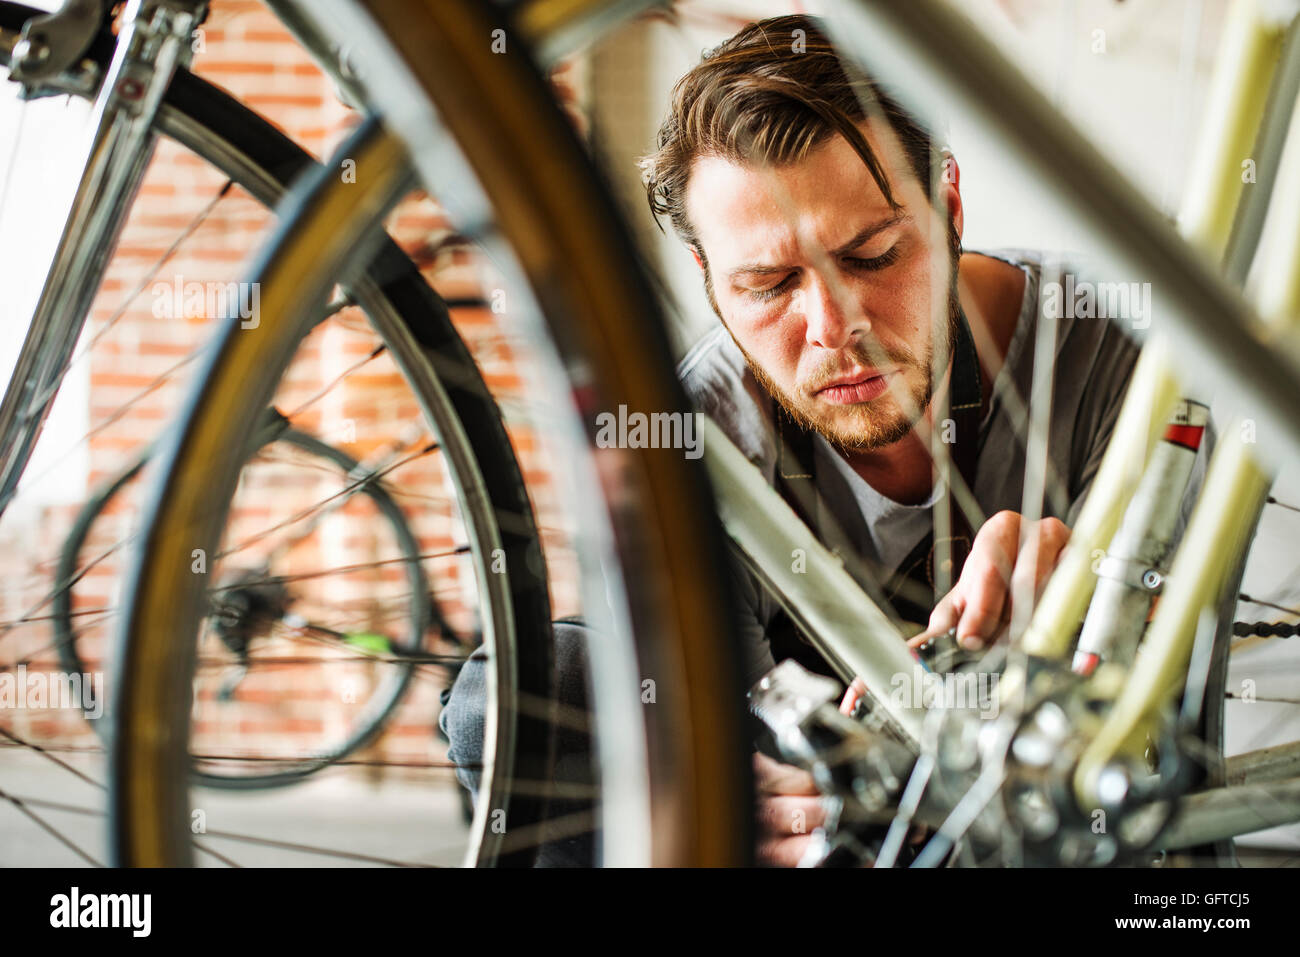 A Man Working In A Bicycle Repair Shop Stock Photo Alamy